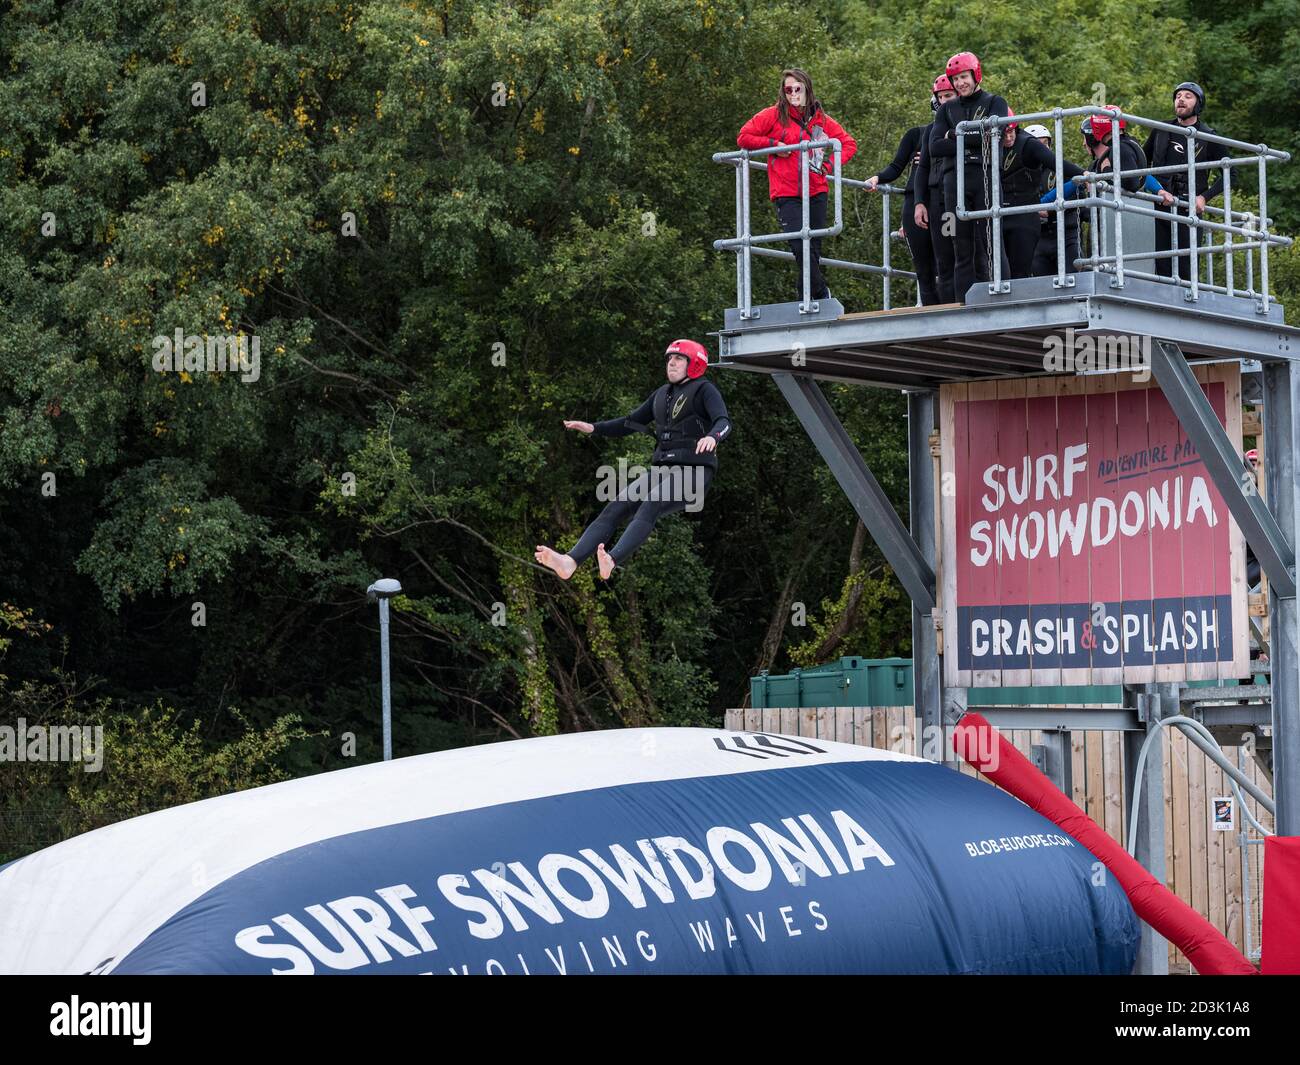 An adventurous lady leaps from a high platform to bounce on the airbag at Surf Snowdonia, Wales Stock Photo